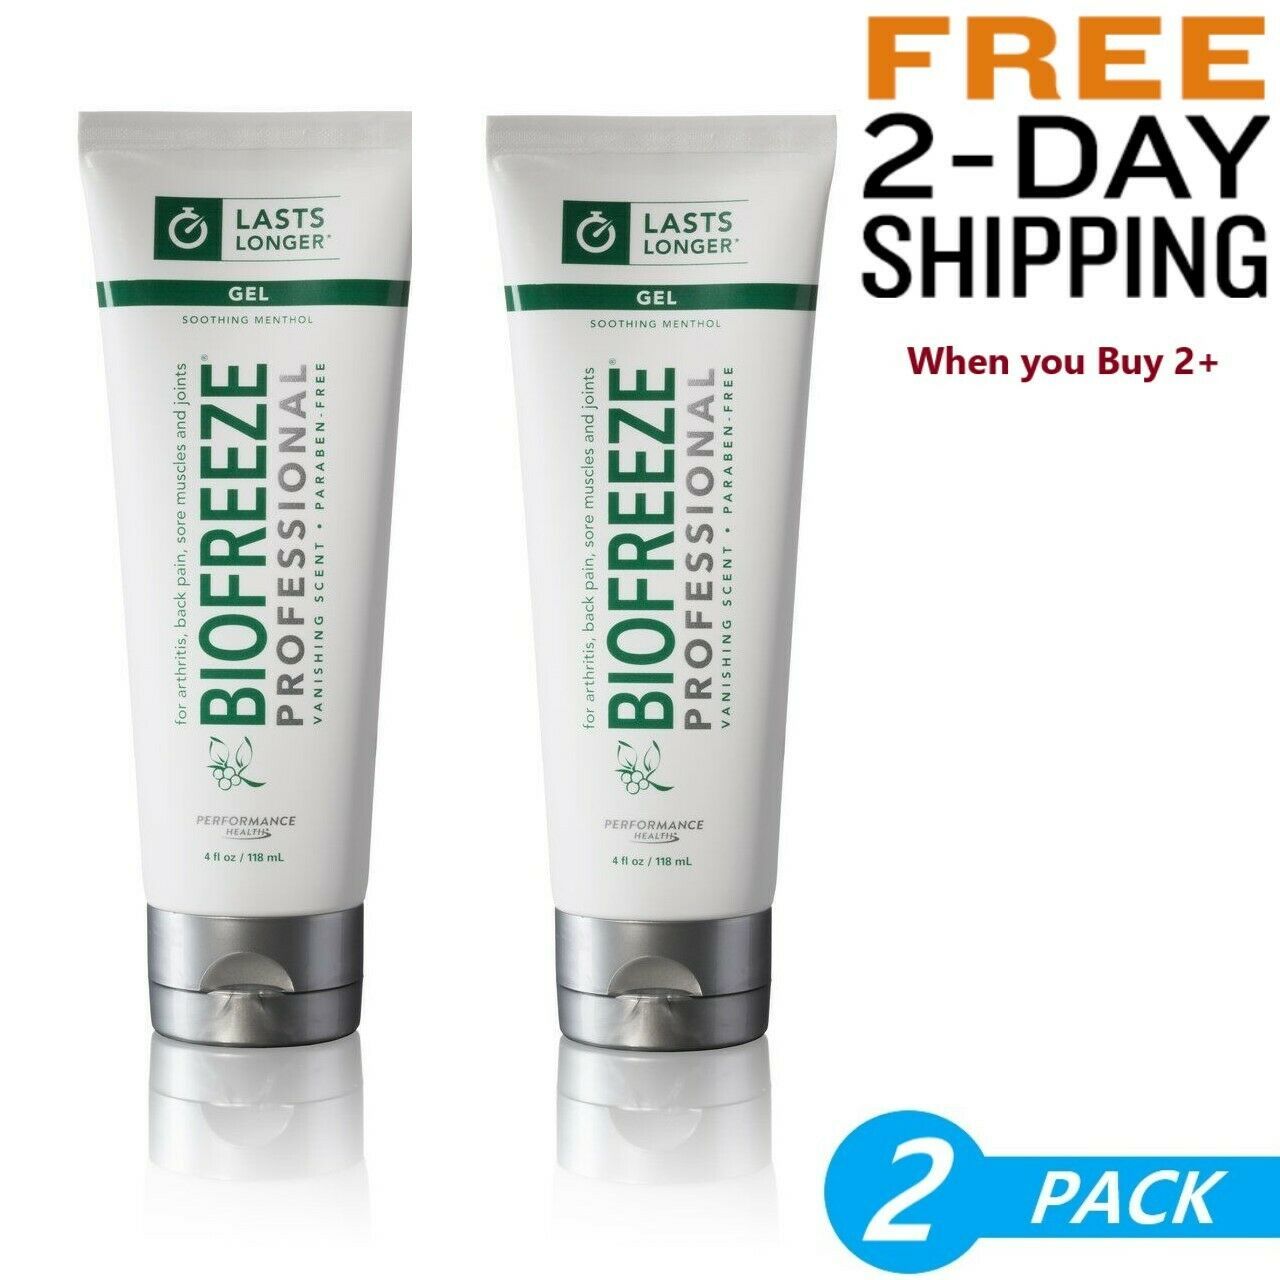 Biofreeze Professional 4oz Gel Tube - Pack of 2 - Free 2nd day (Buy 2